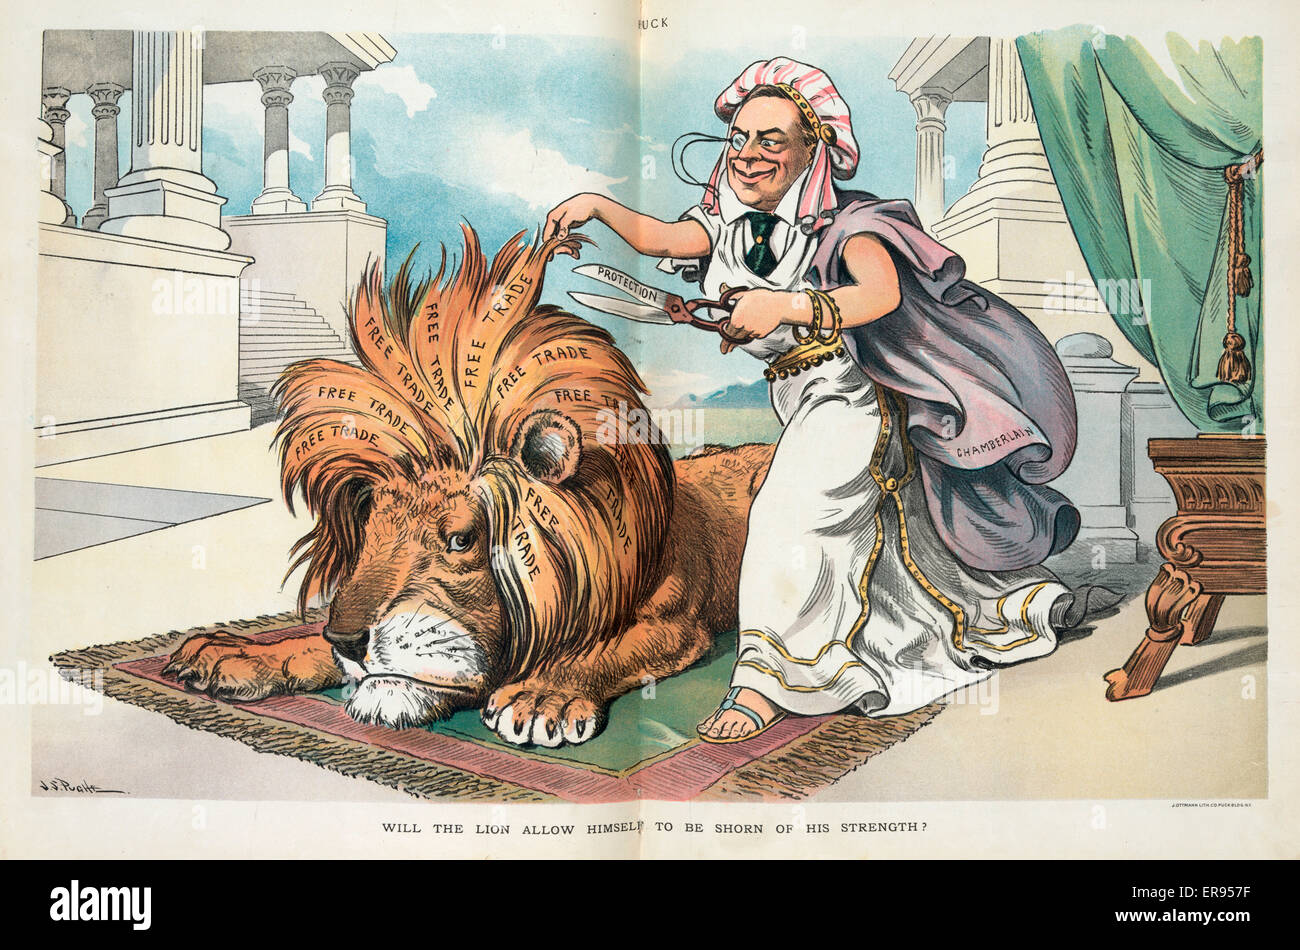 Will the lion allow himself to be shorn of his strength? Stock Photo